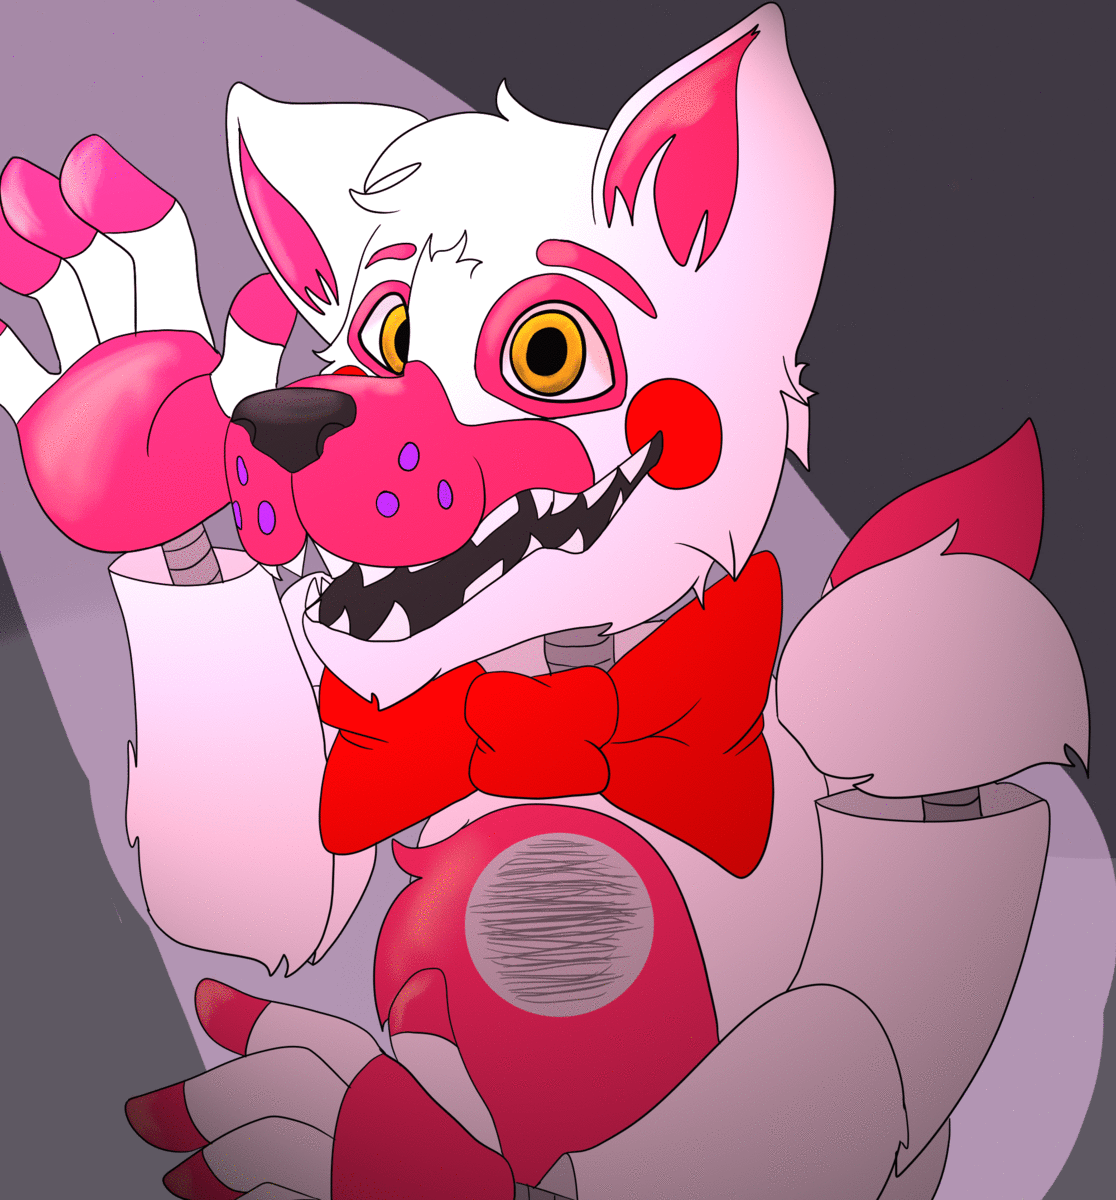 Funtime Foxy By Themoonlitwolf On Deviantart If this picture is your intele...